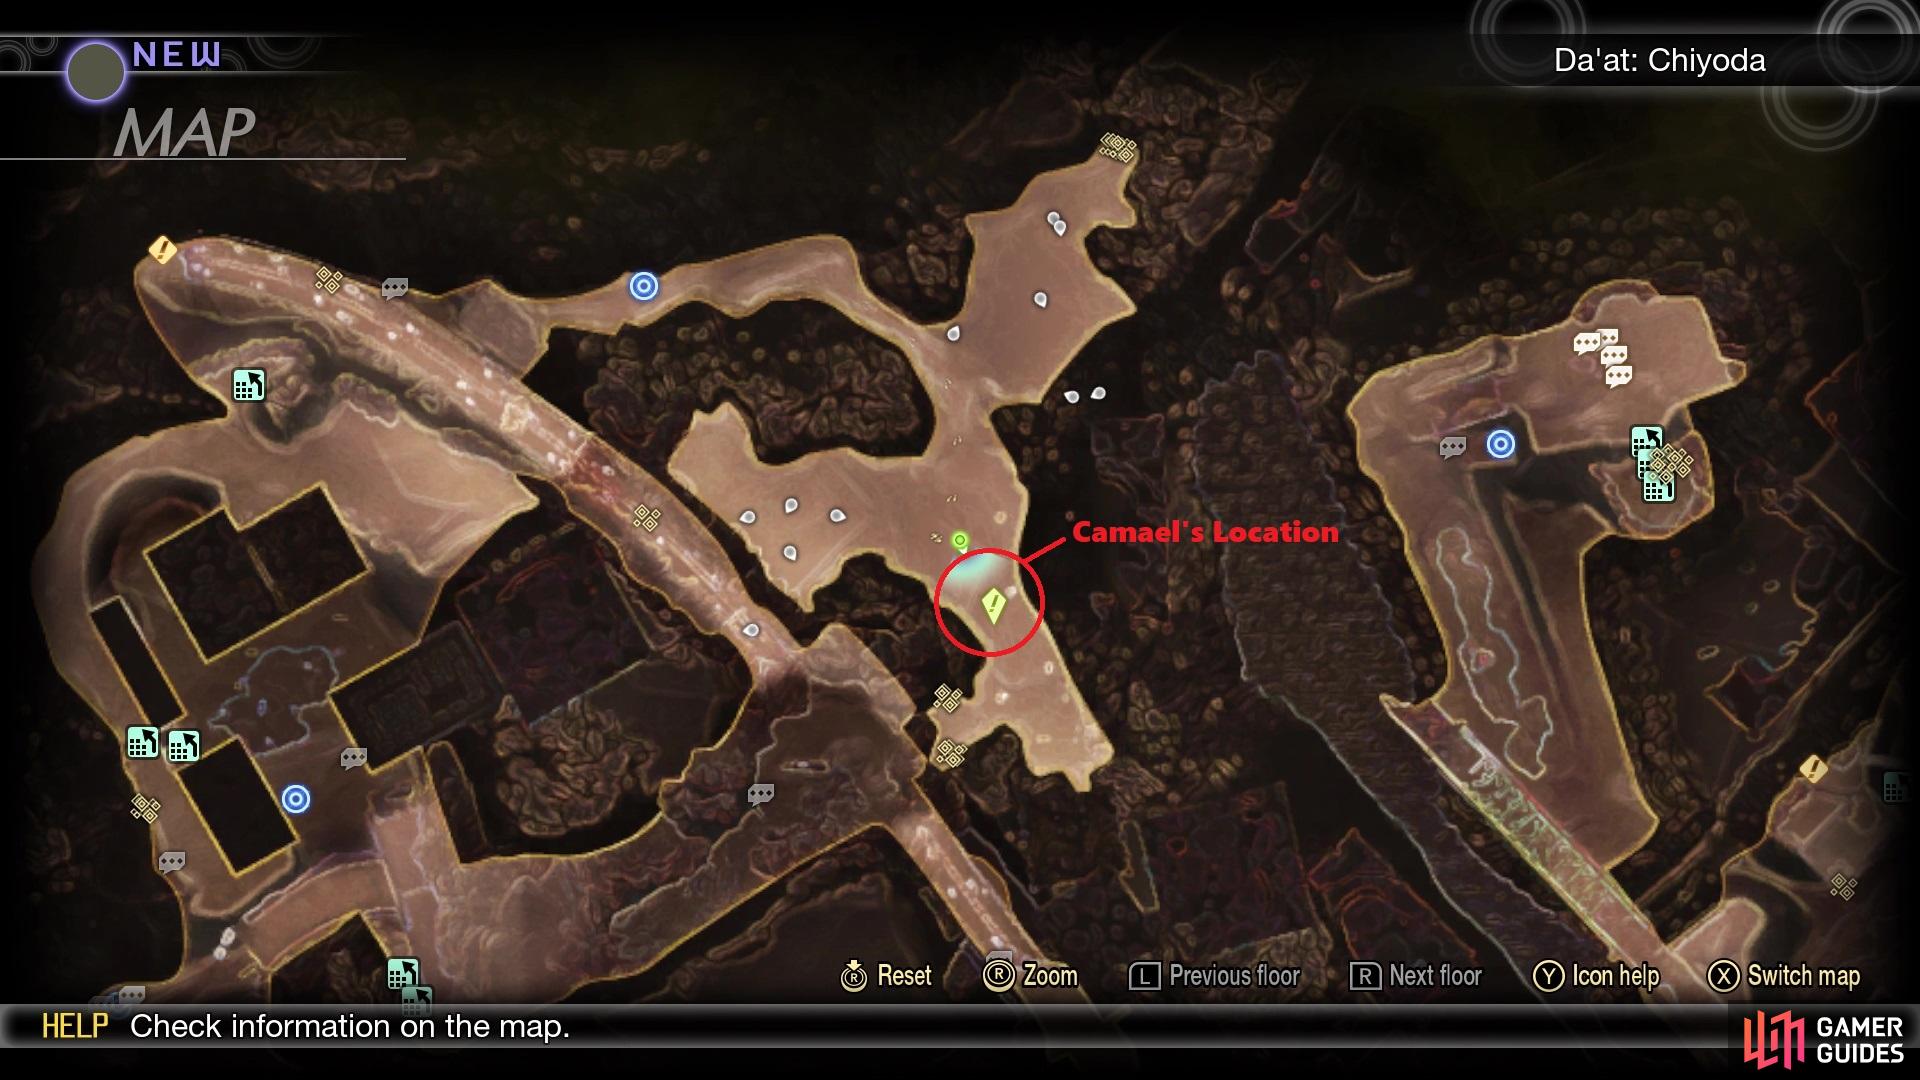 Camael’s location on the map